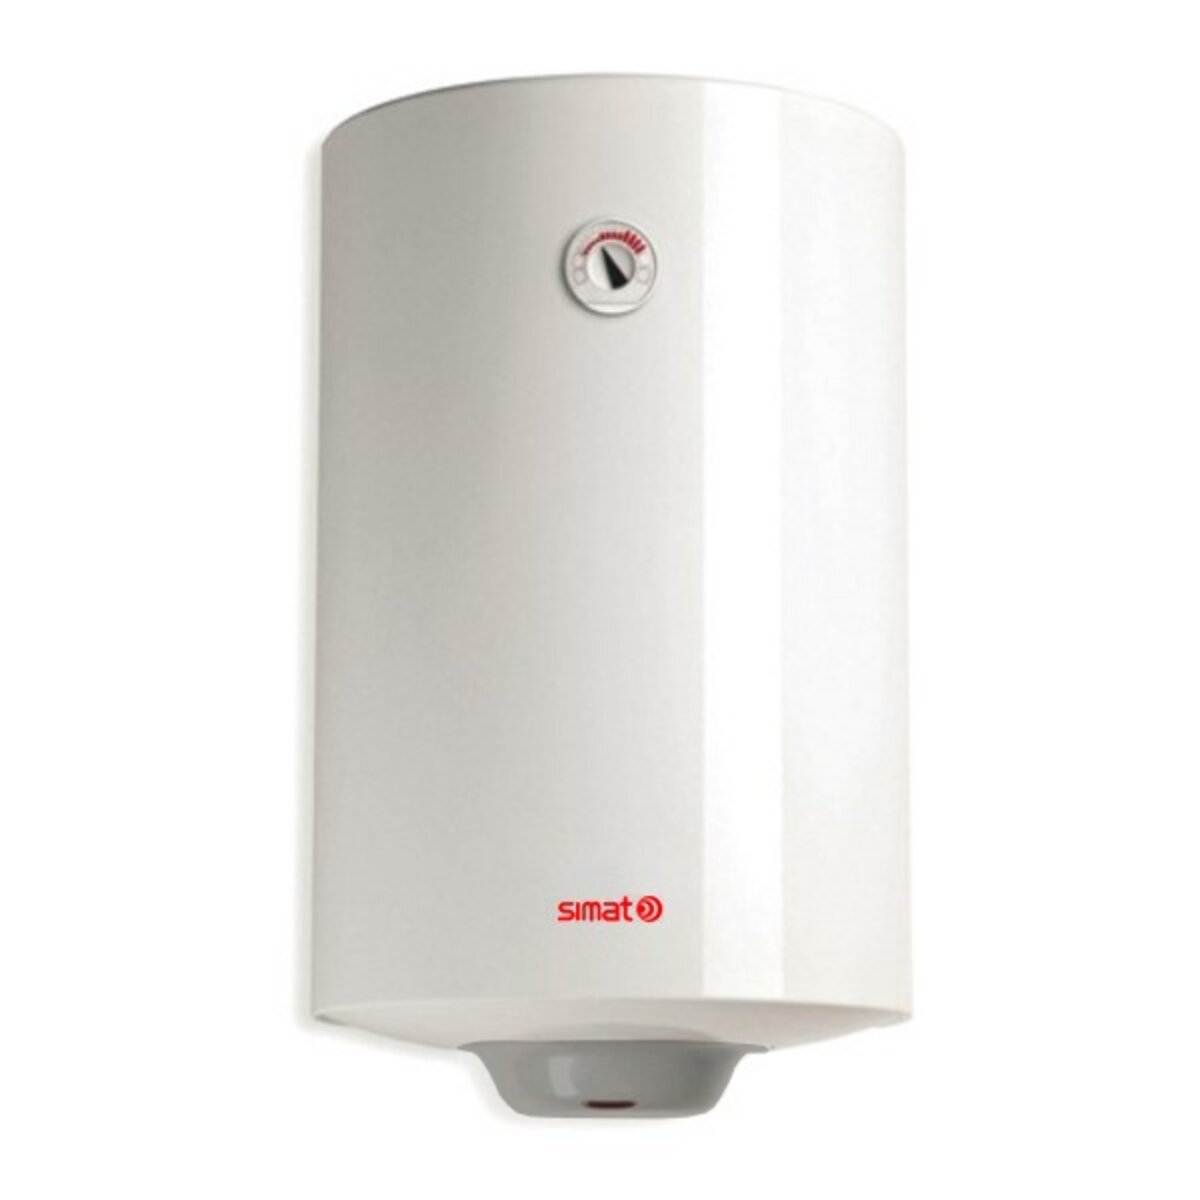 Simat electric water heater by Ariston 100 liters vertical 2 year warranty